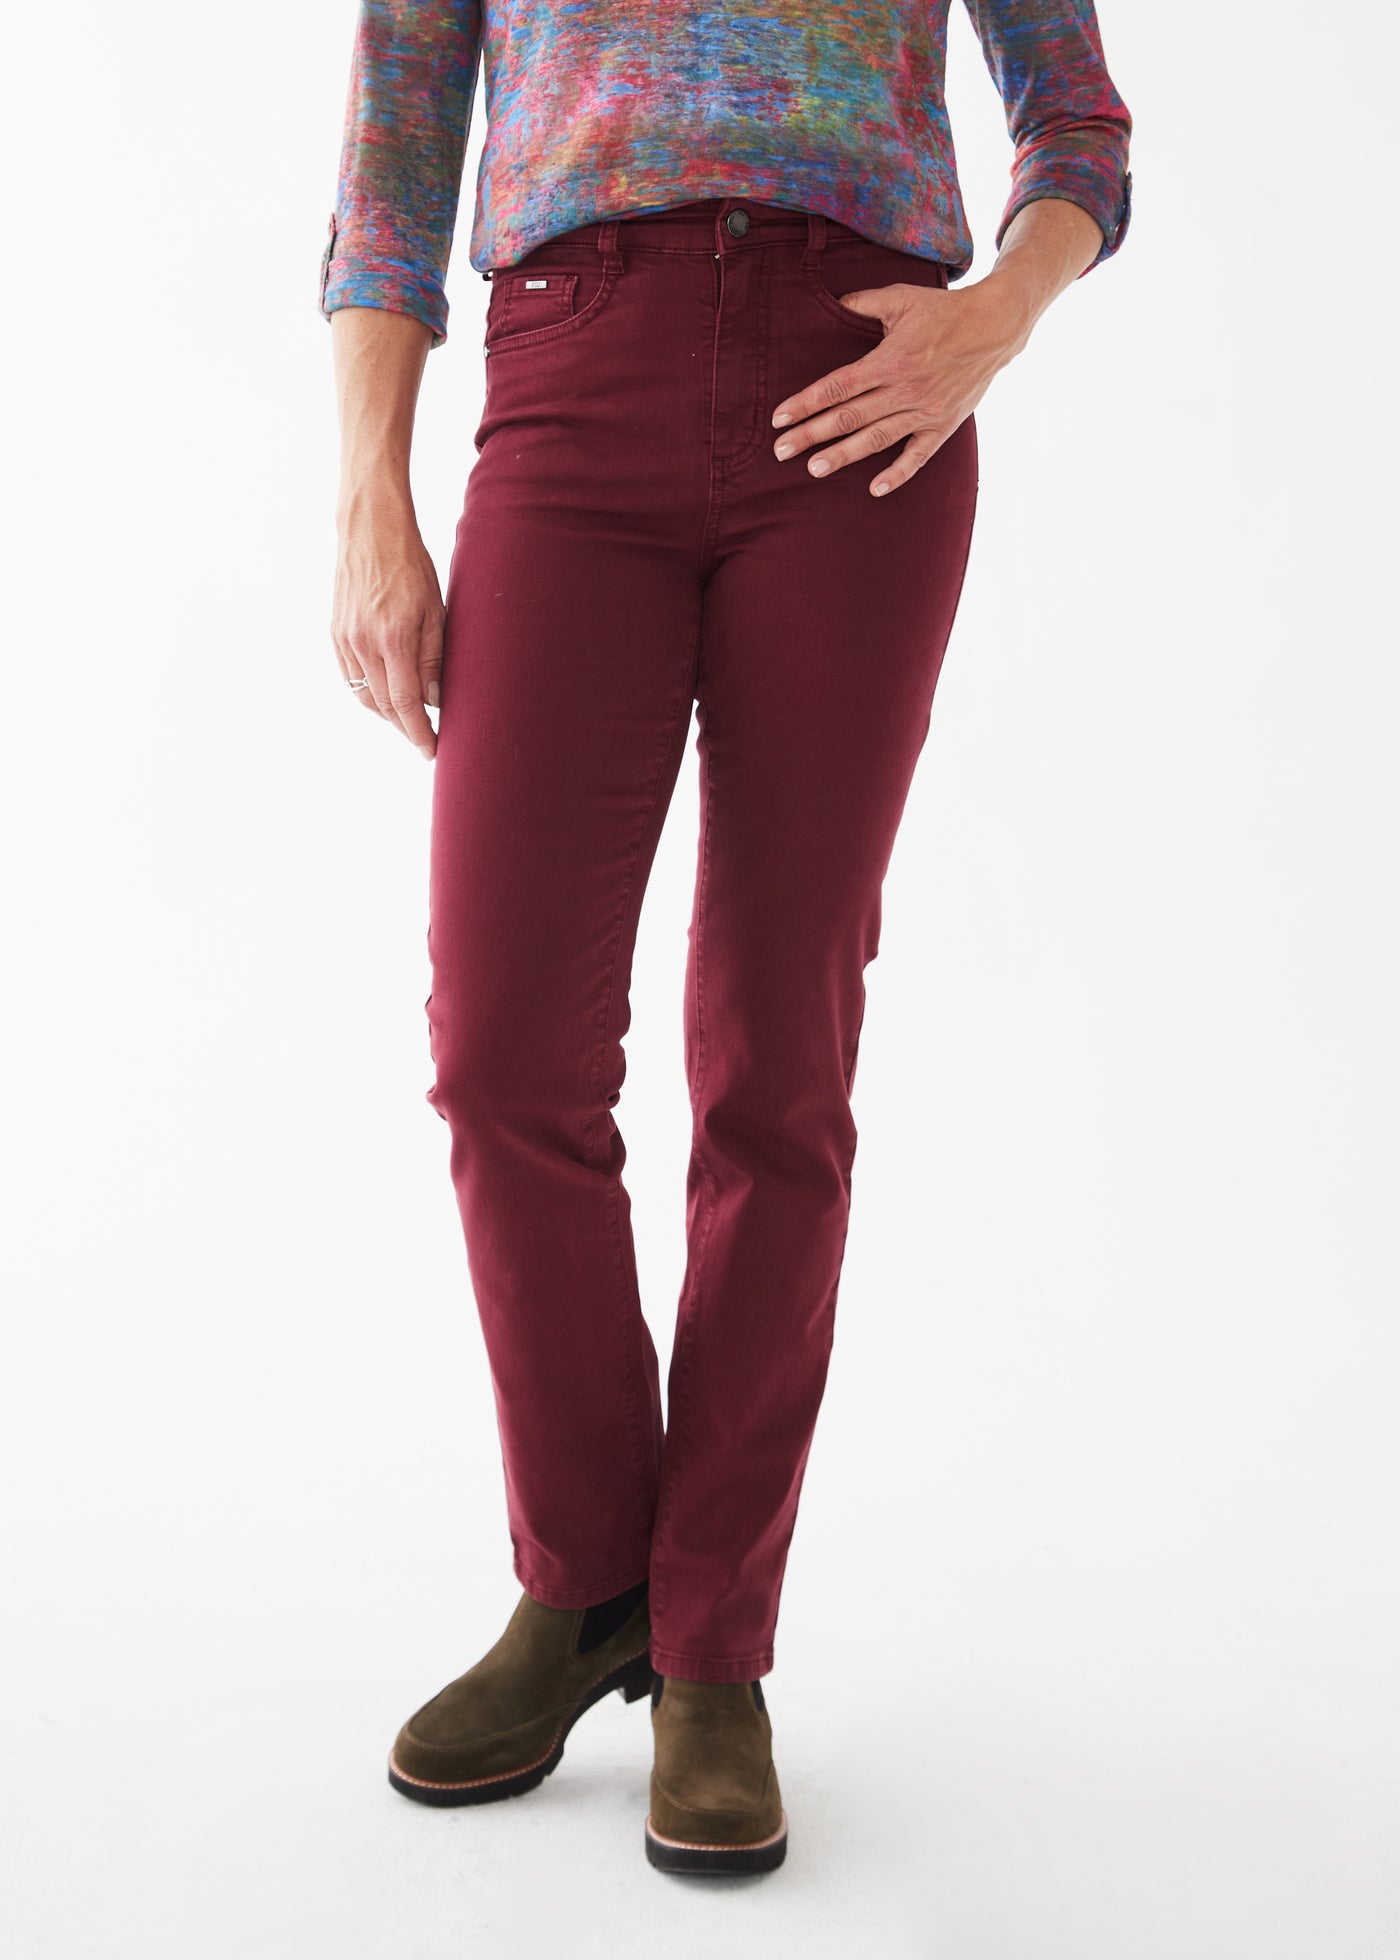 Suzanne Straight Leg French Dressing Jeans